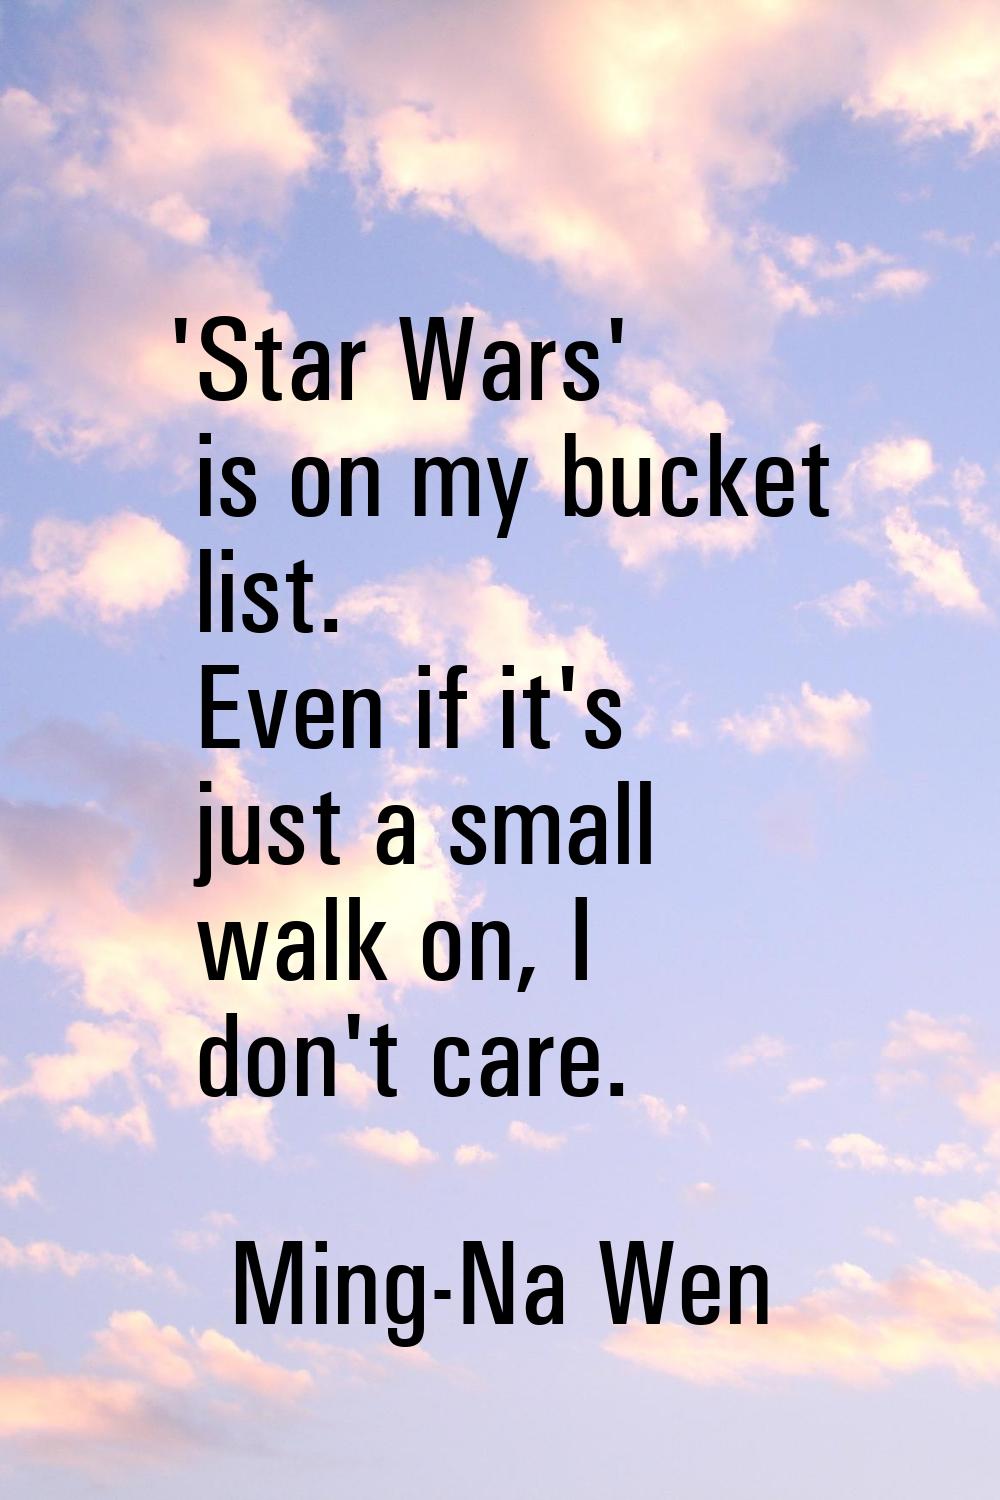 'Star Wars' is on my bucket list. Even if it's just a small walk on, I don't care.